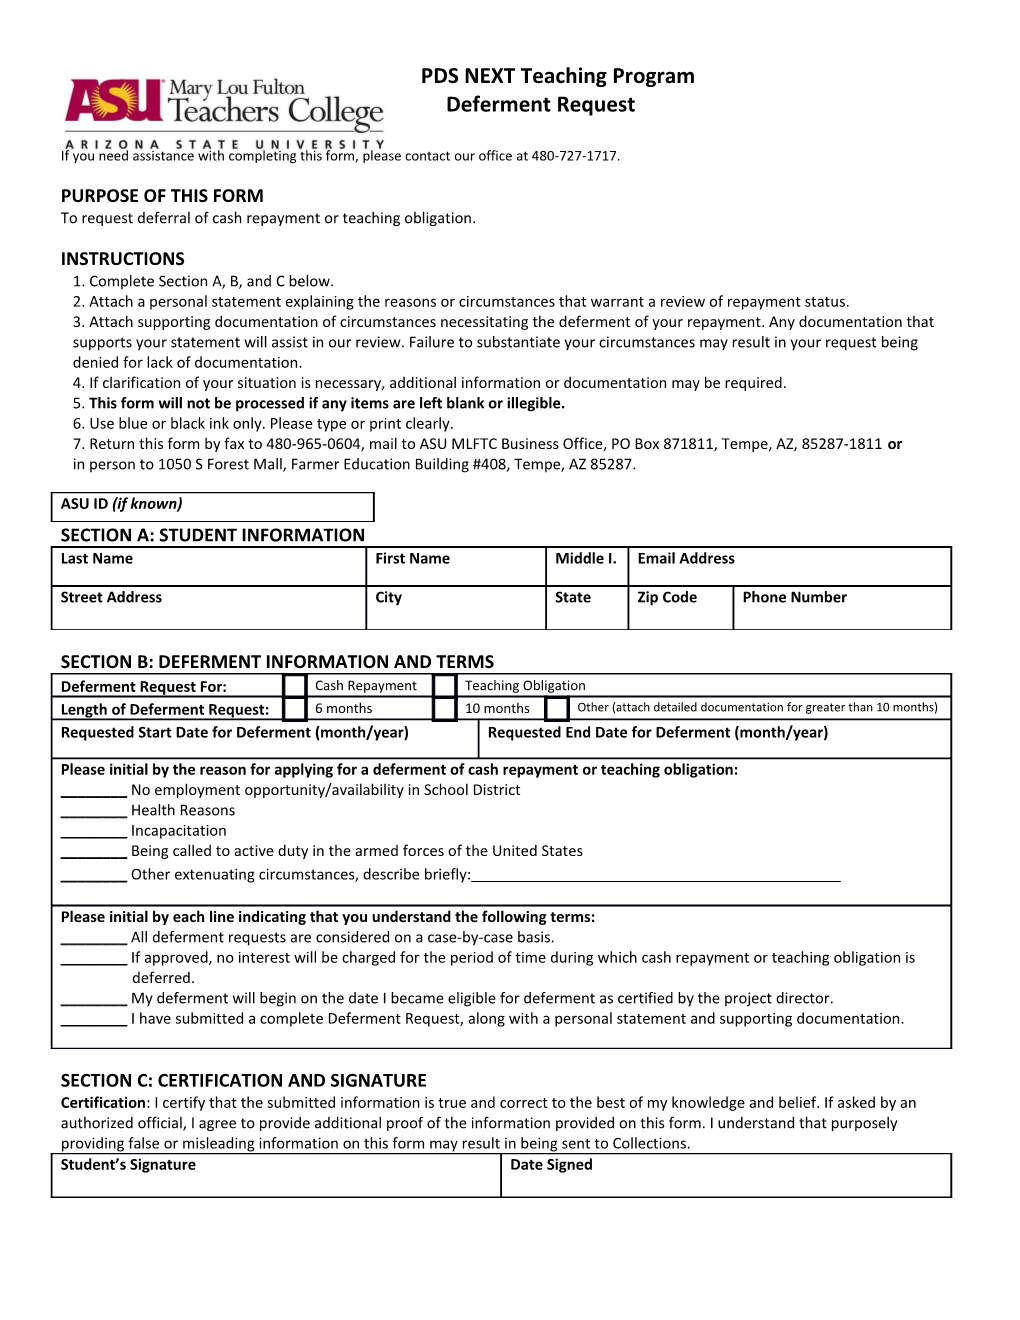 If You Need Assistance with Completing This Form, Please Contact Our Office at 480-727-1717